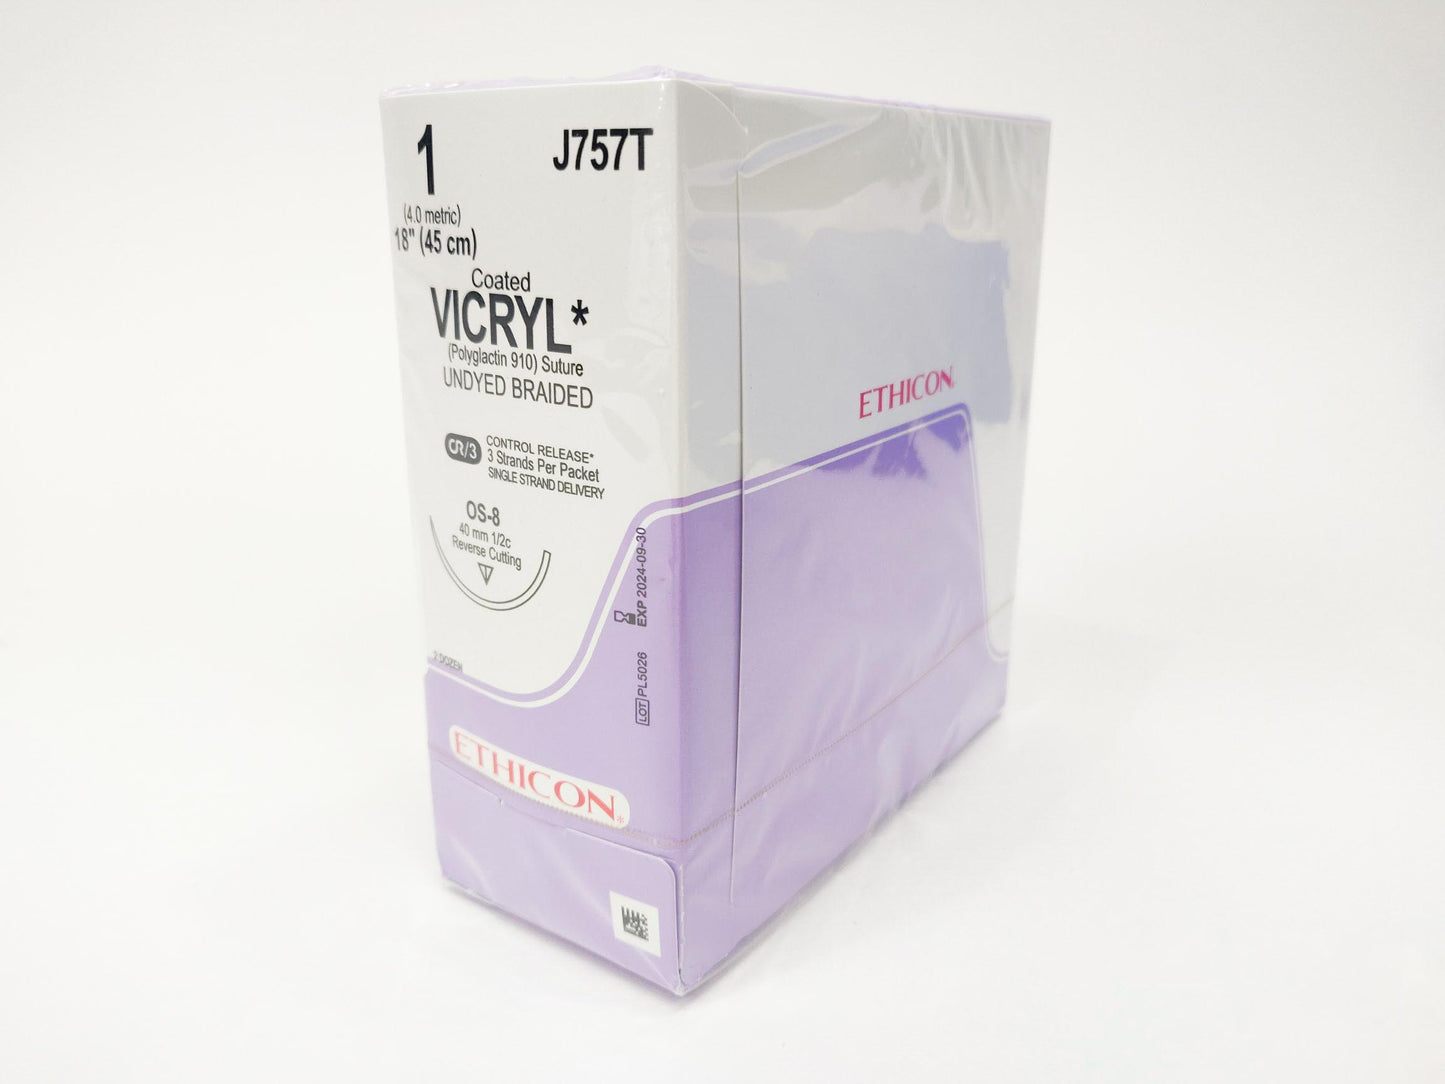 Ethicon J757T Coated Vicryl (Polyglactin 910) Suture Undyed Braided (EXP 09-30-2024)